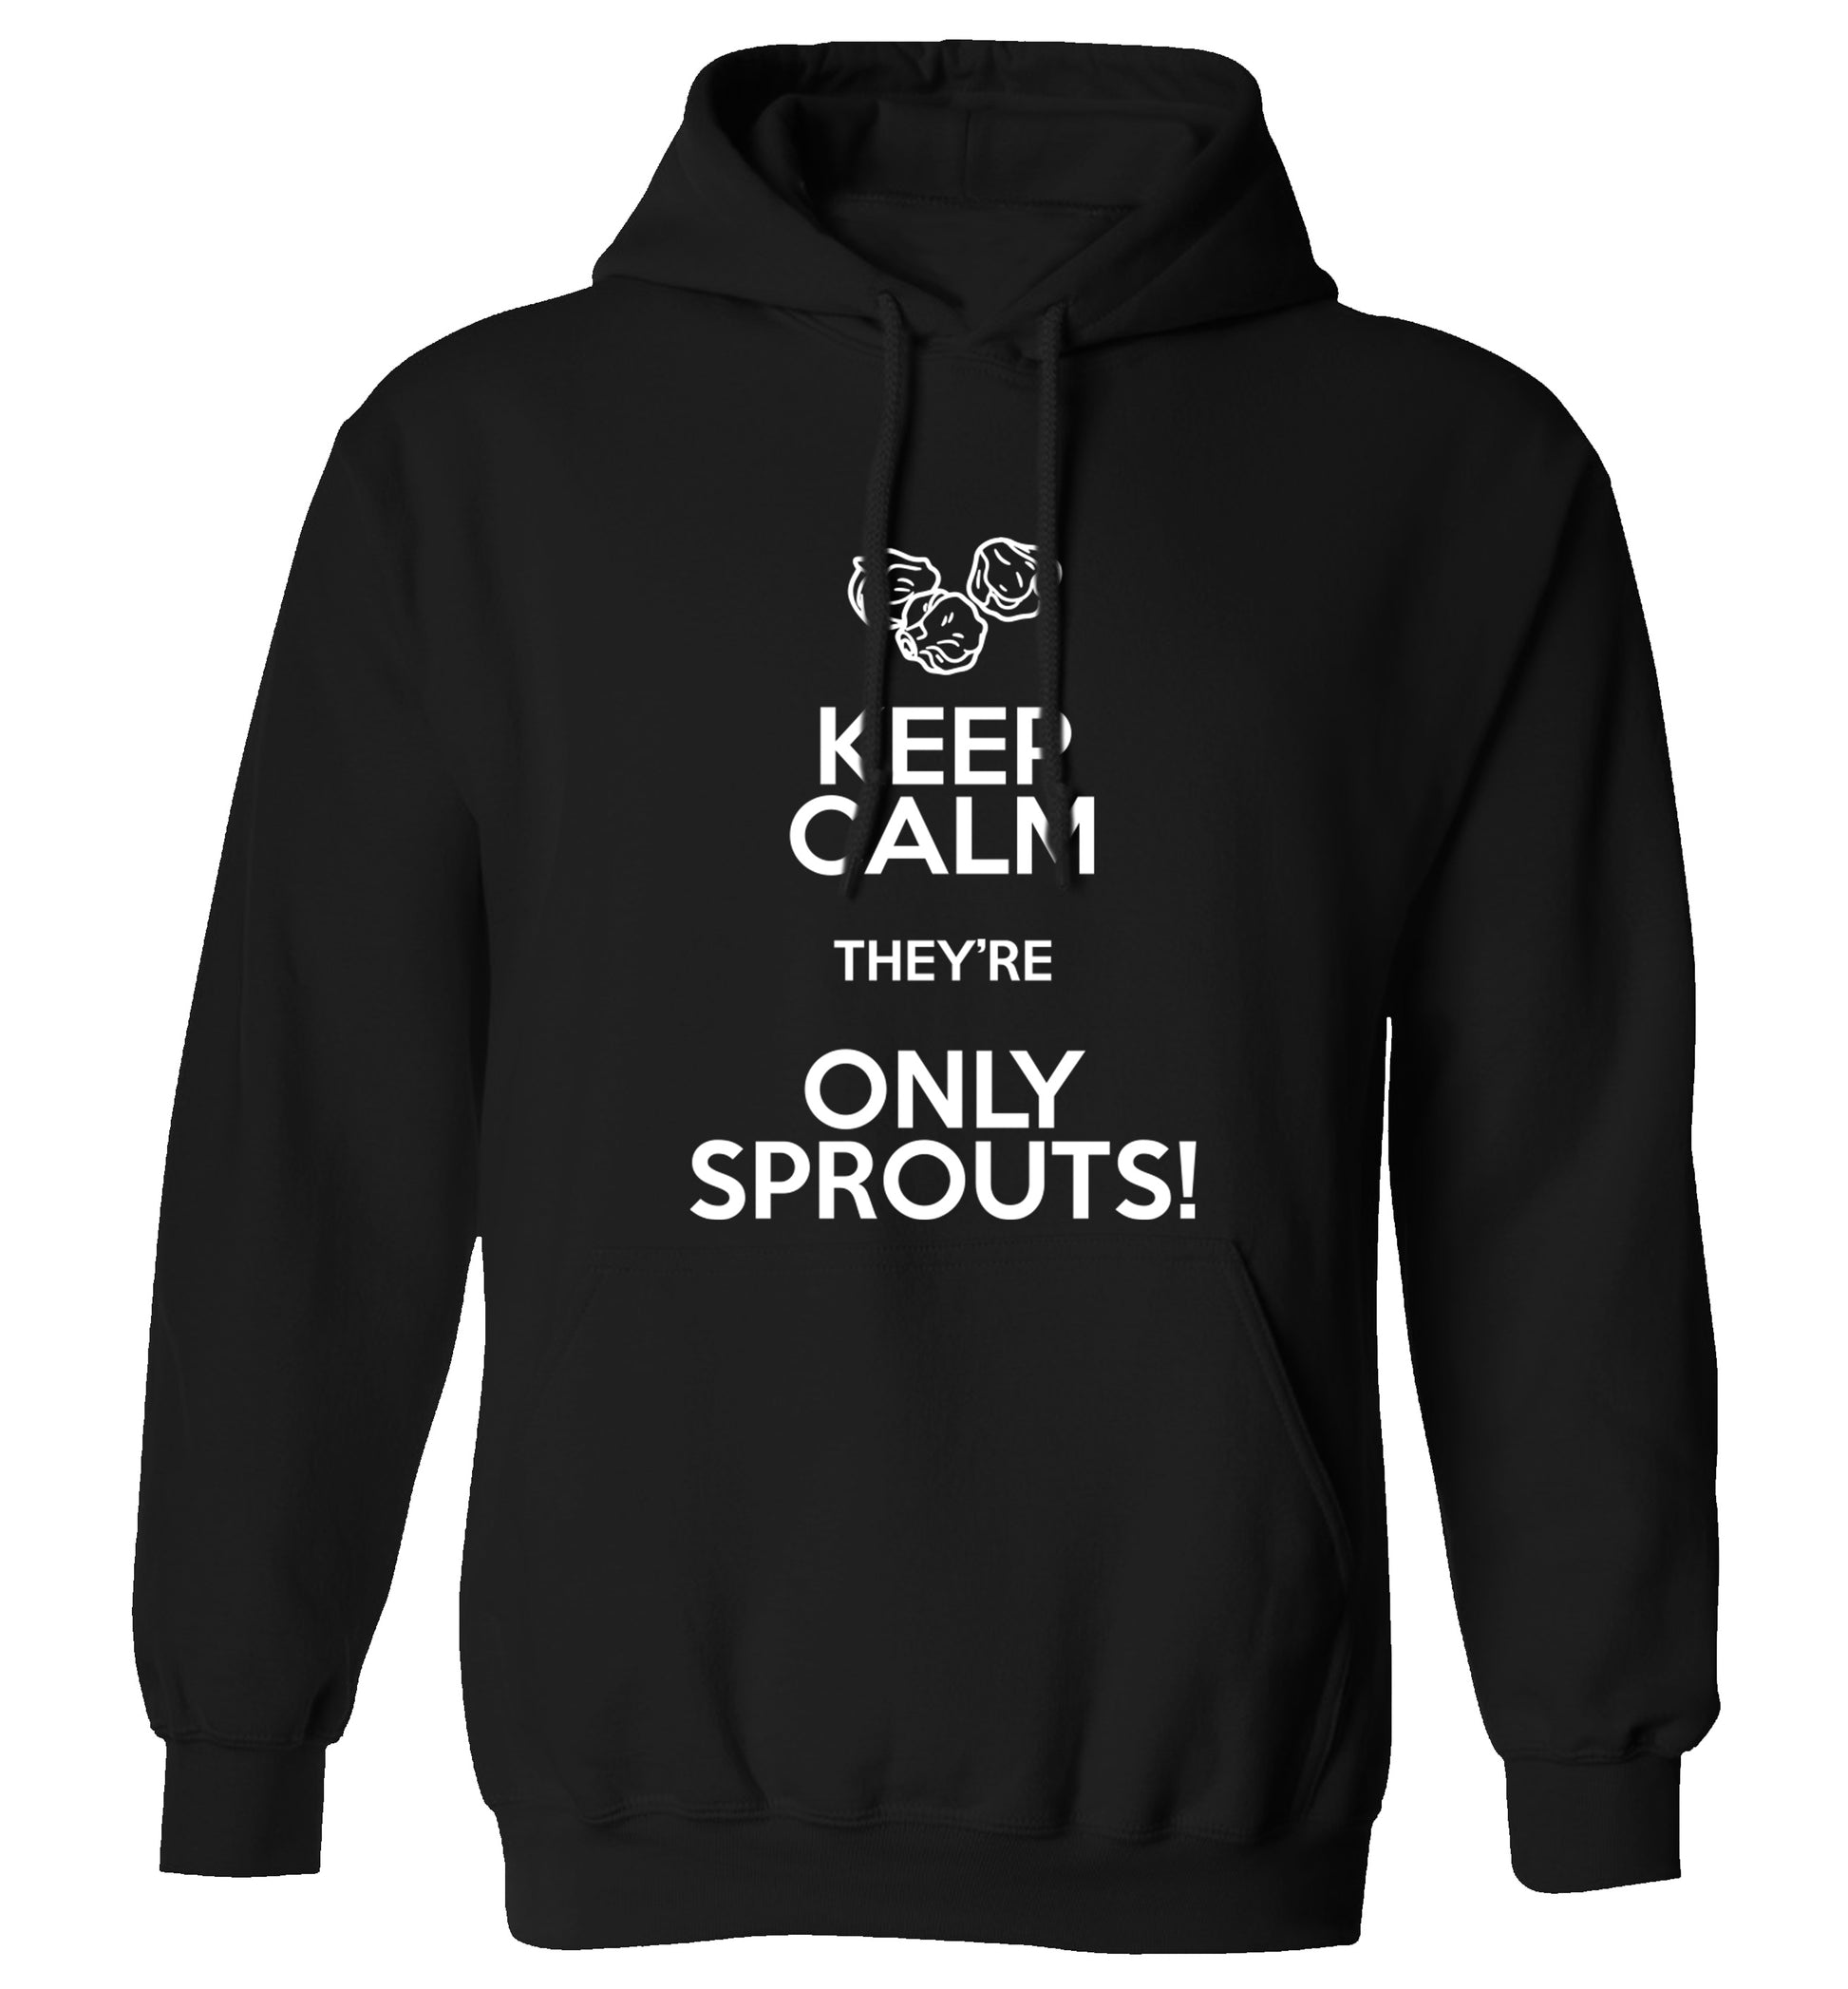 Keep calm they're only sprouts adults unisex black hoodie 2XL